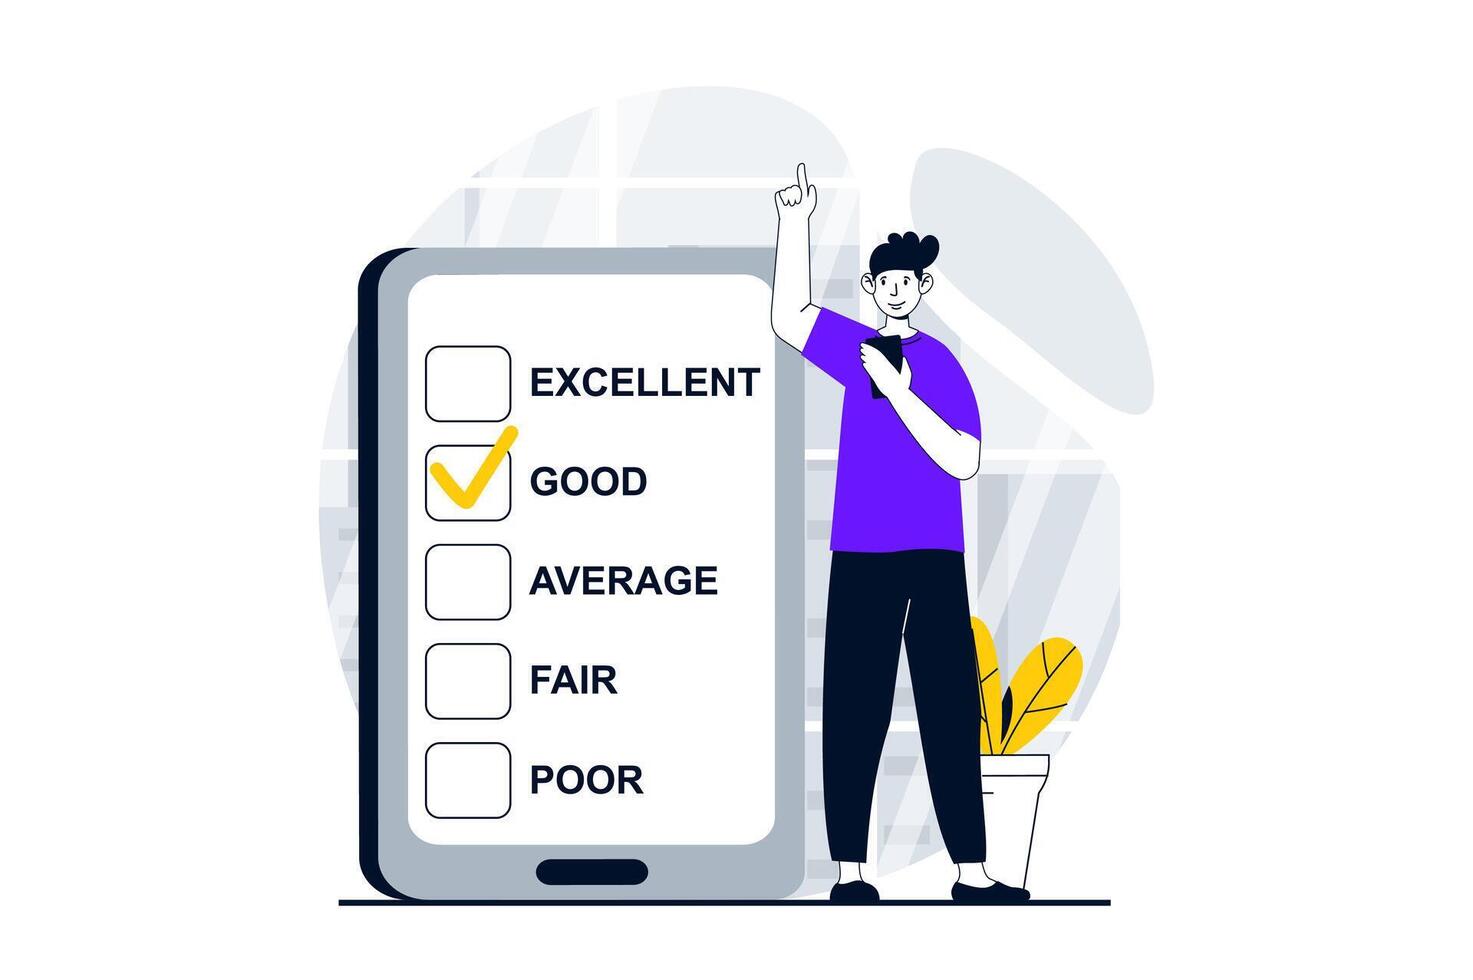 Feedback page concept with people scene in flat design for web. Man choosing good evaluation in questionnaire checklist in mobile app. Vector illustration for social media banner, marketing material.